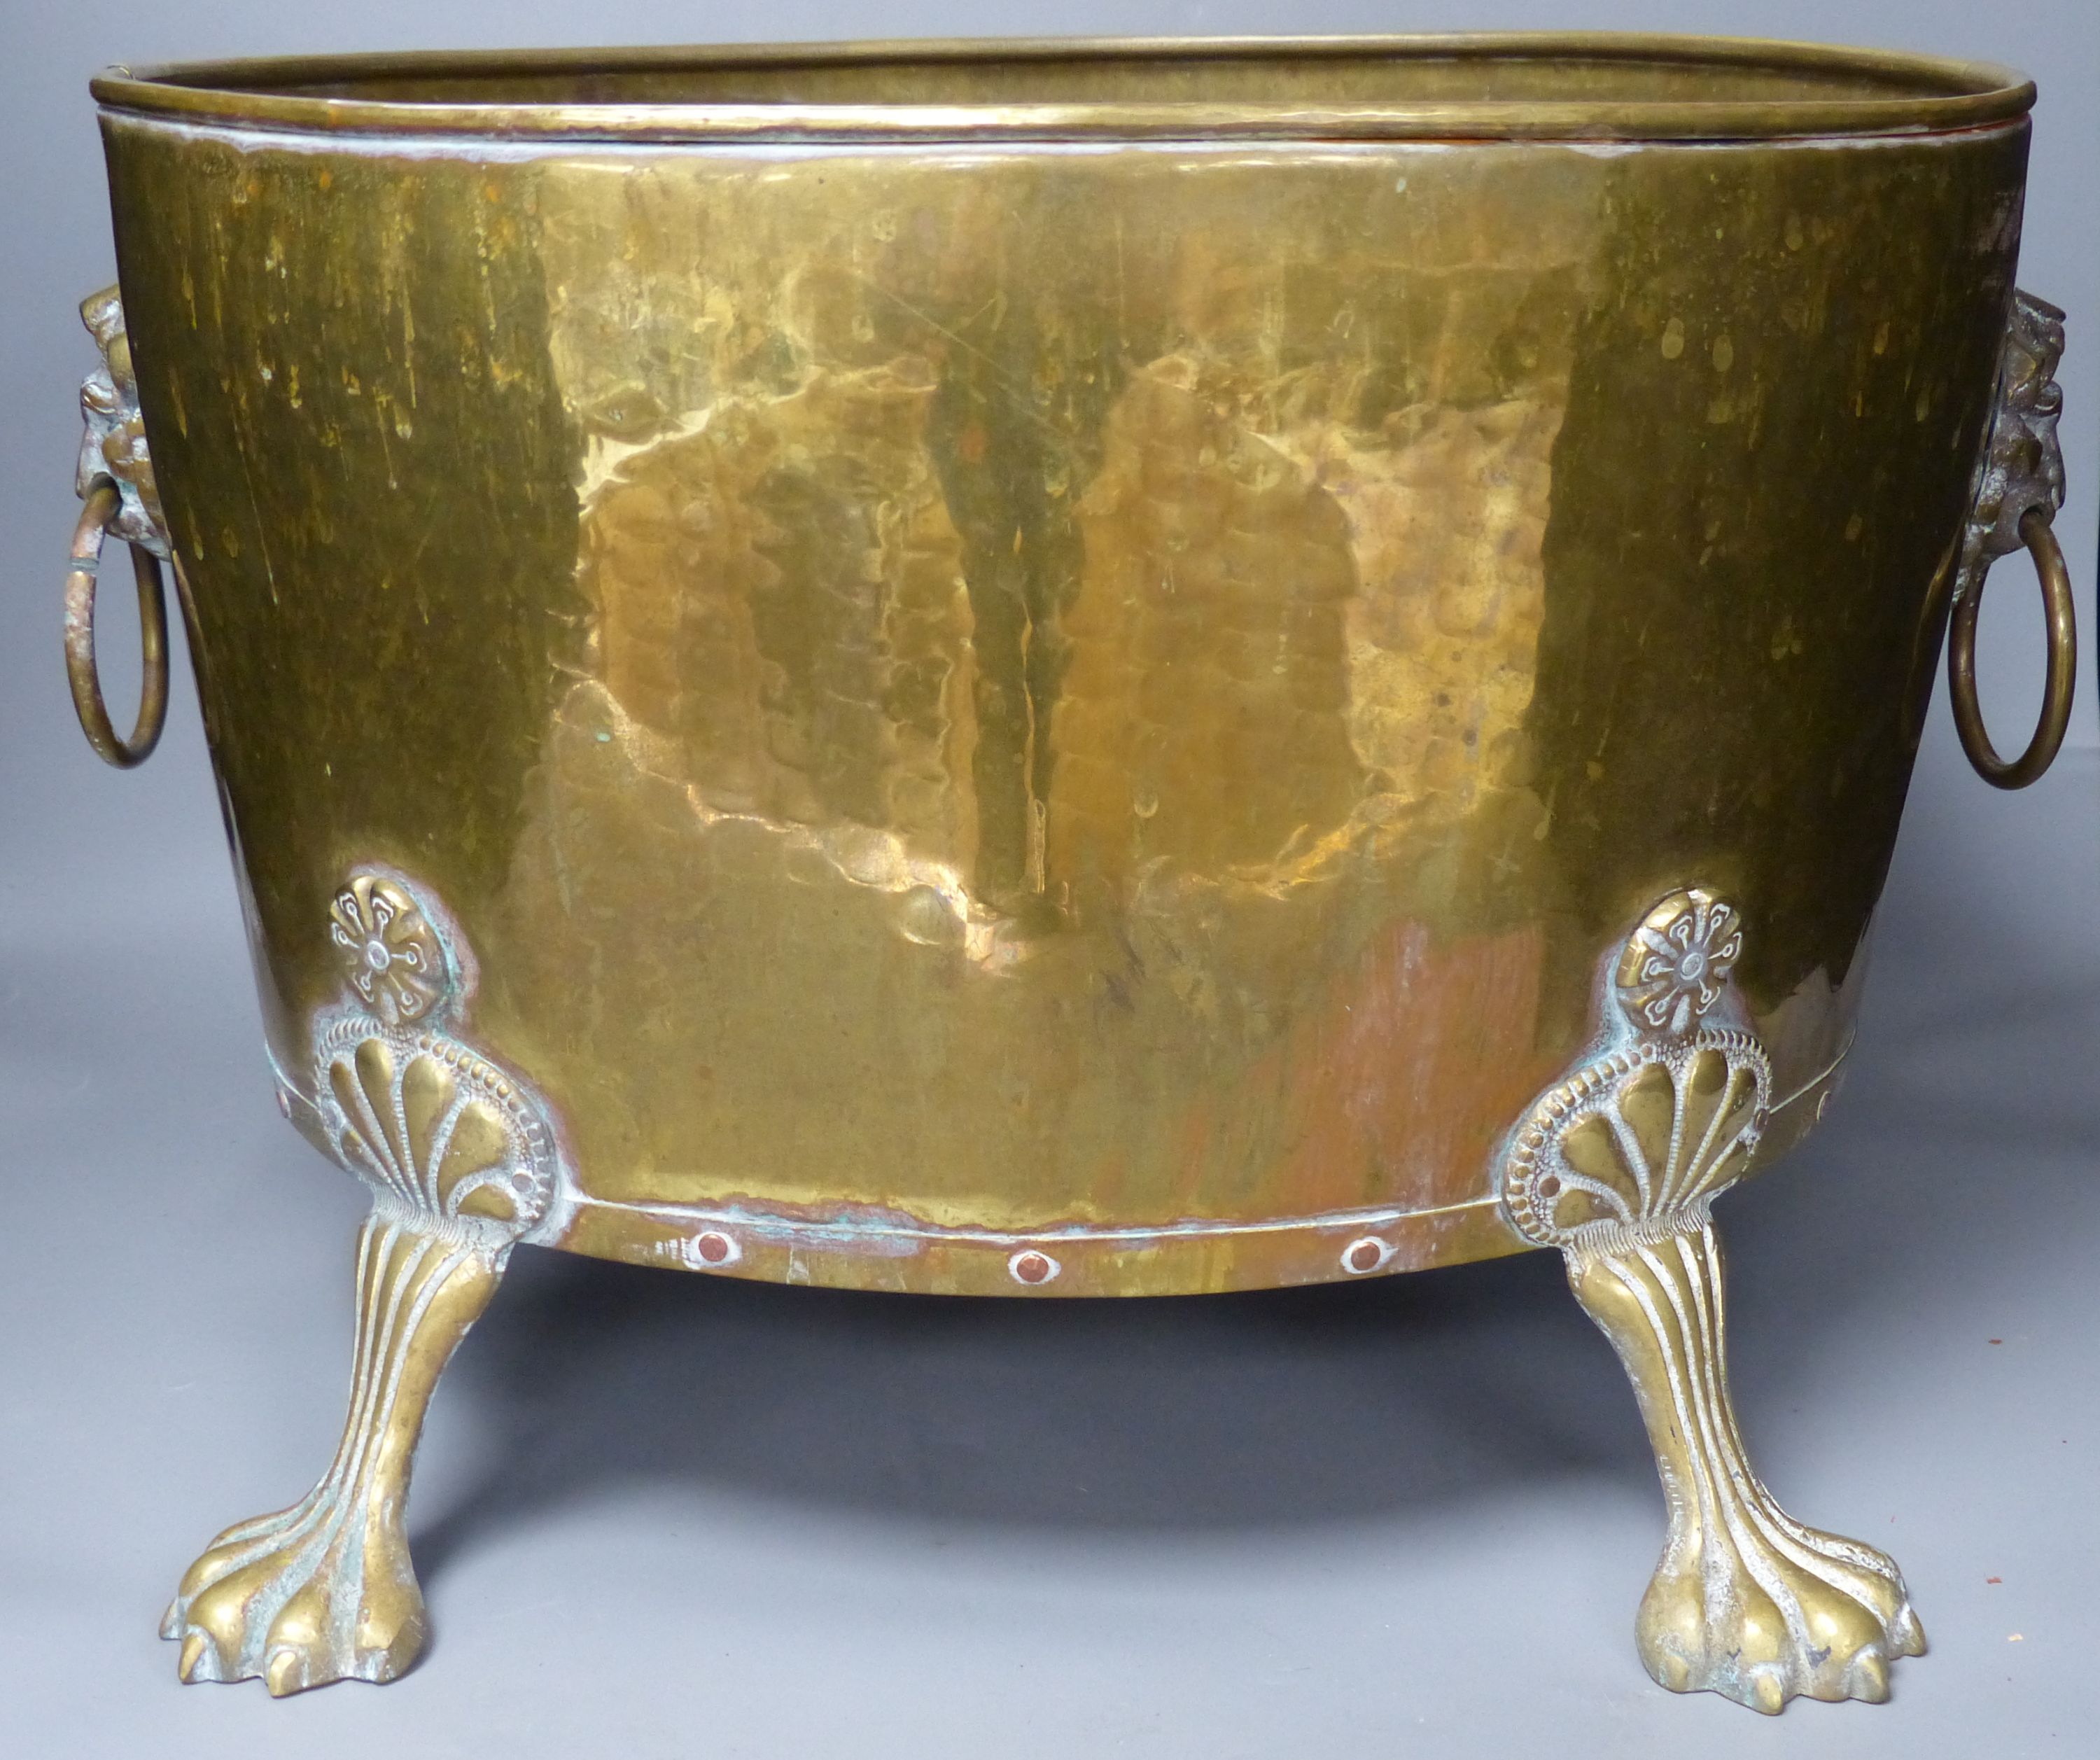 A planished brass wine cooler or jardiniere, approximate length 45cm